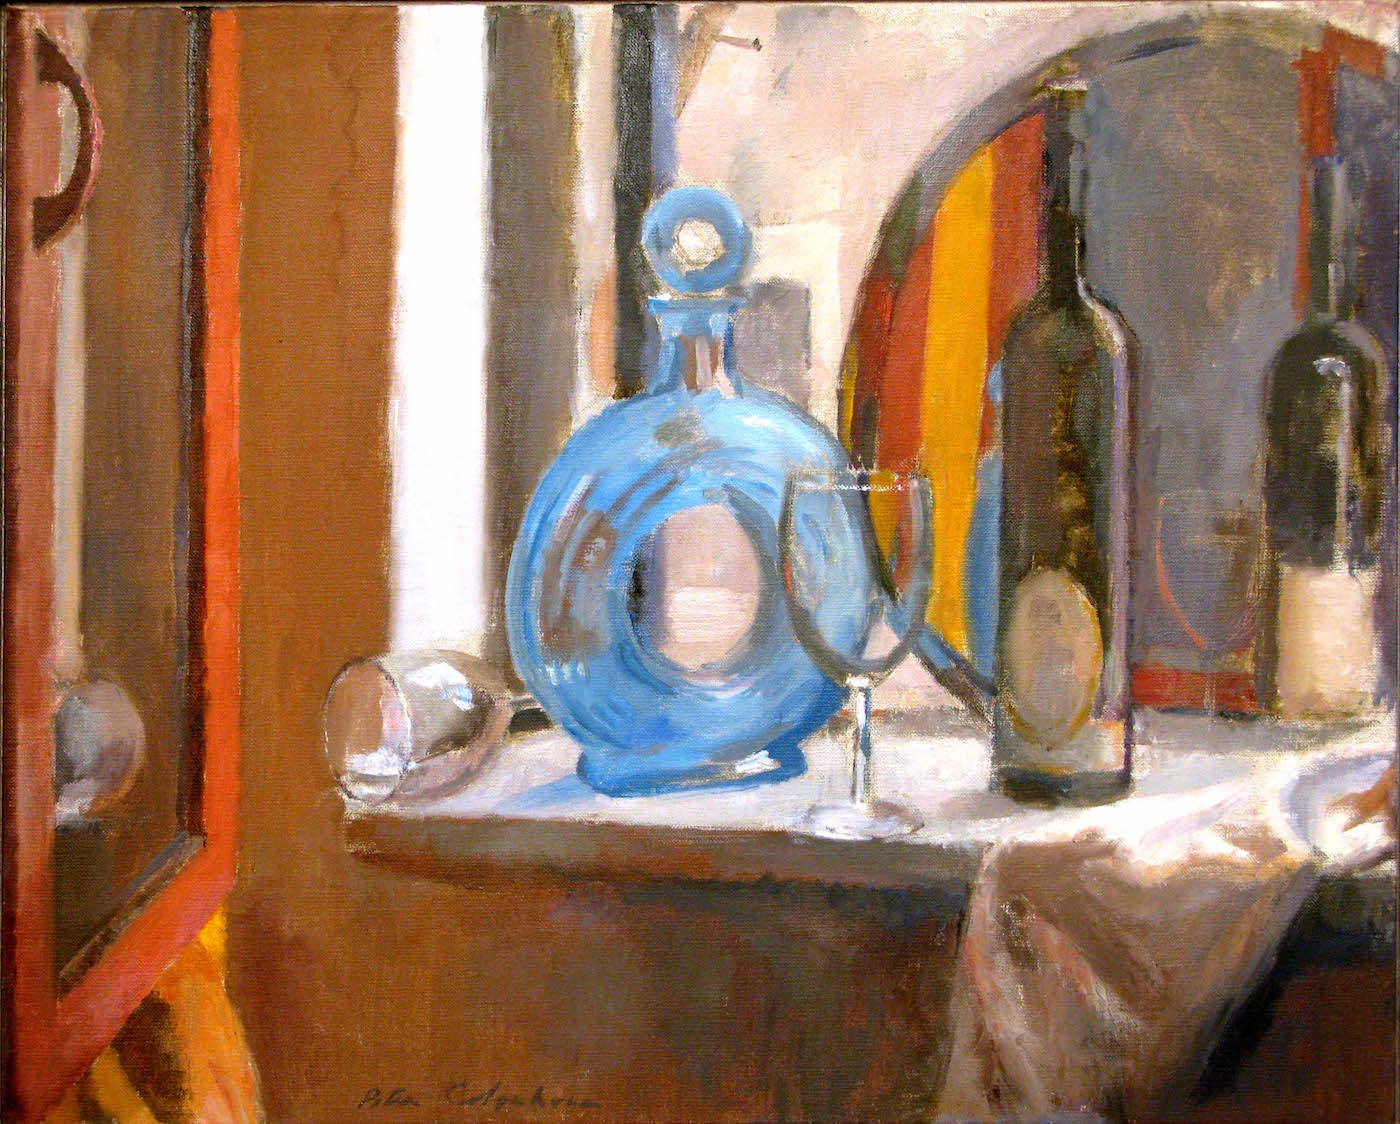 Blue Decantor, 20 x 25 inches, oil on linen, 2009.